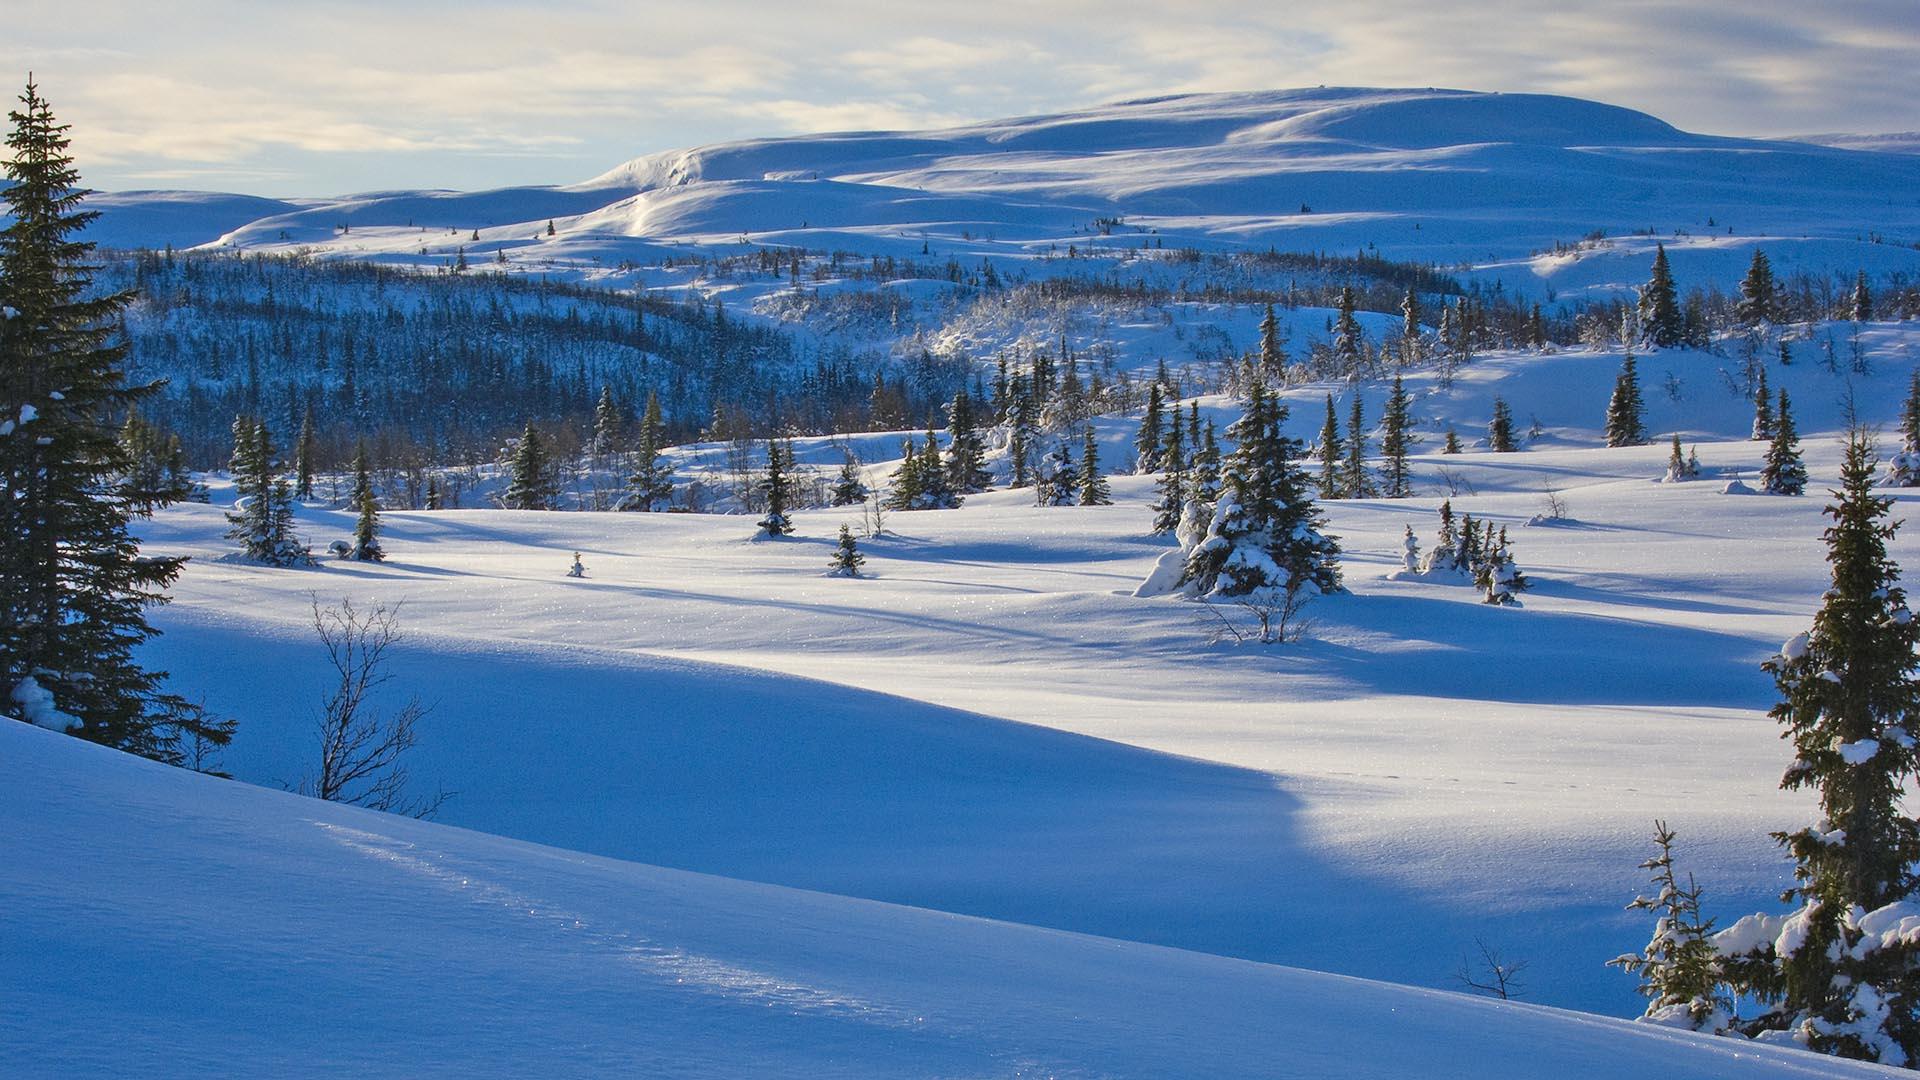 Open mountain terrain in winter with a lot of snow at the tree line with scattered small spruce trees and a taller mountain in the background. The low sun casts long shadows.